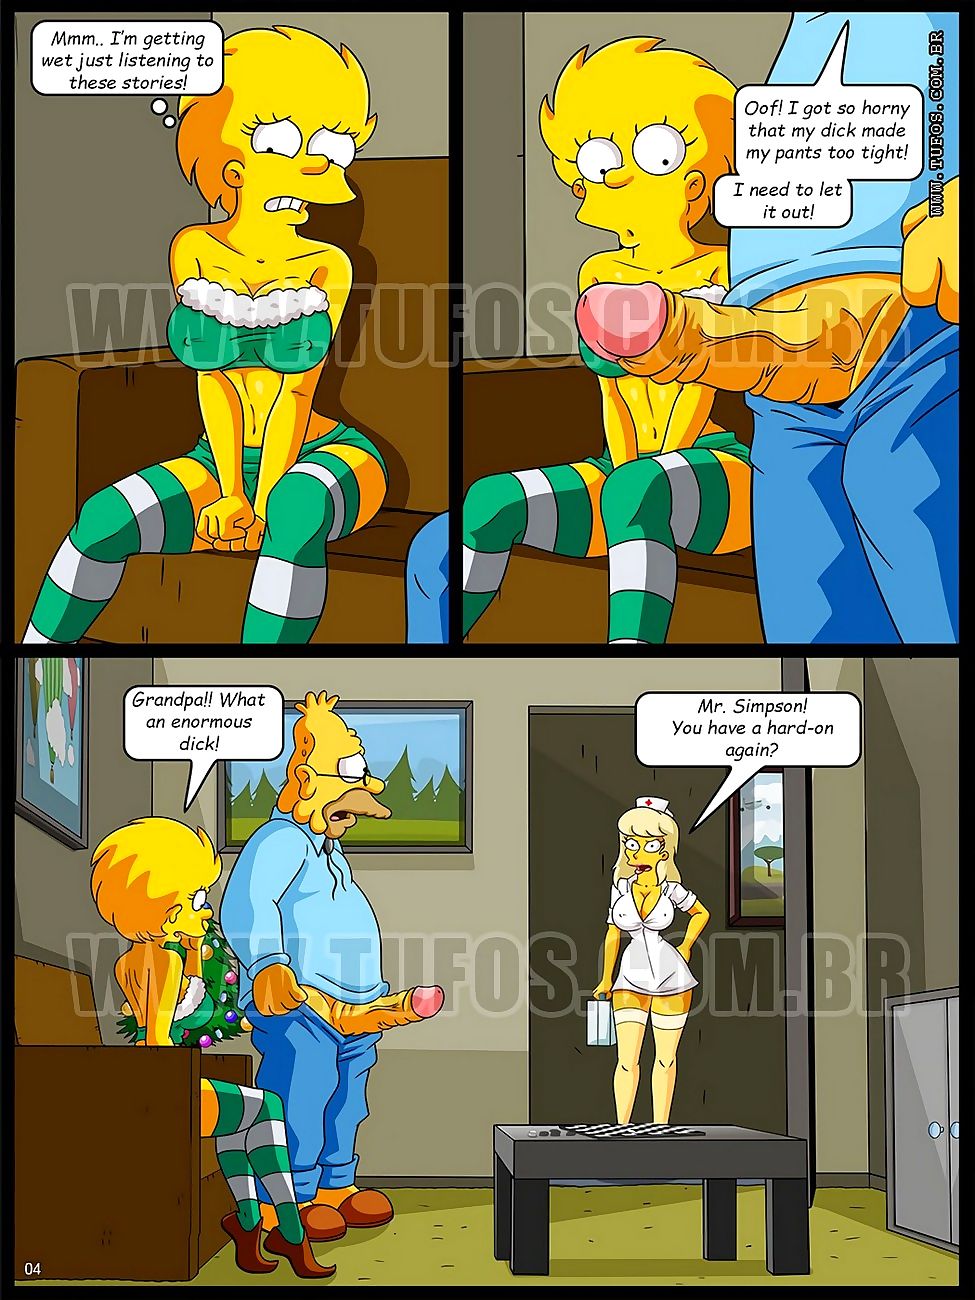 The Simpsons 10 - Christmas At The Retirâ€¦ page 1